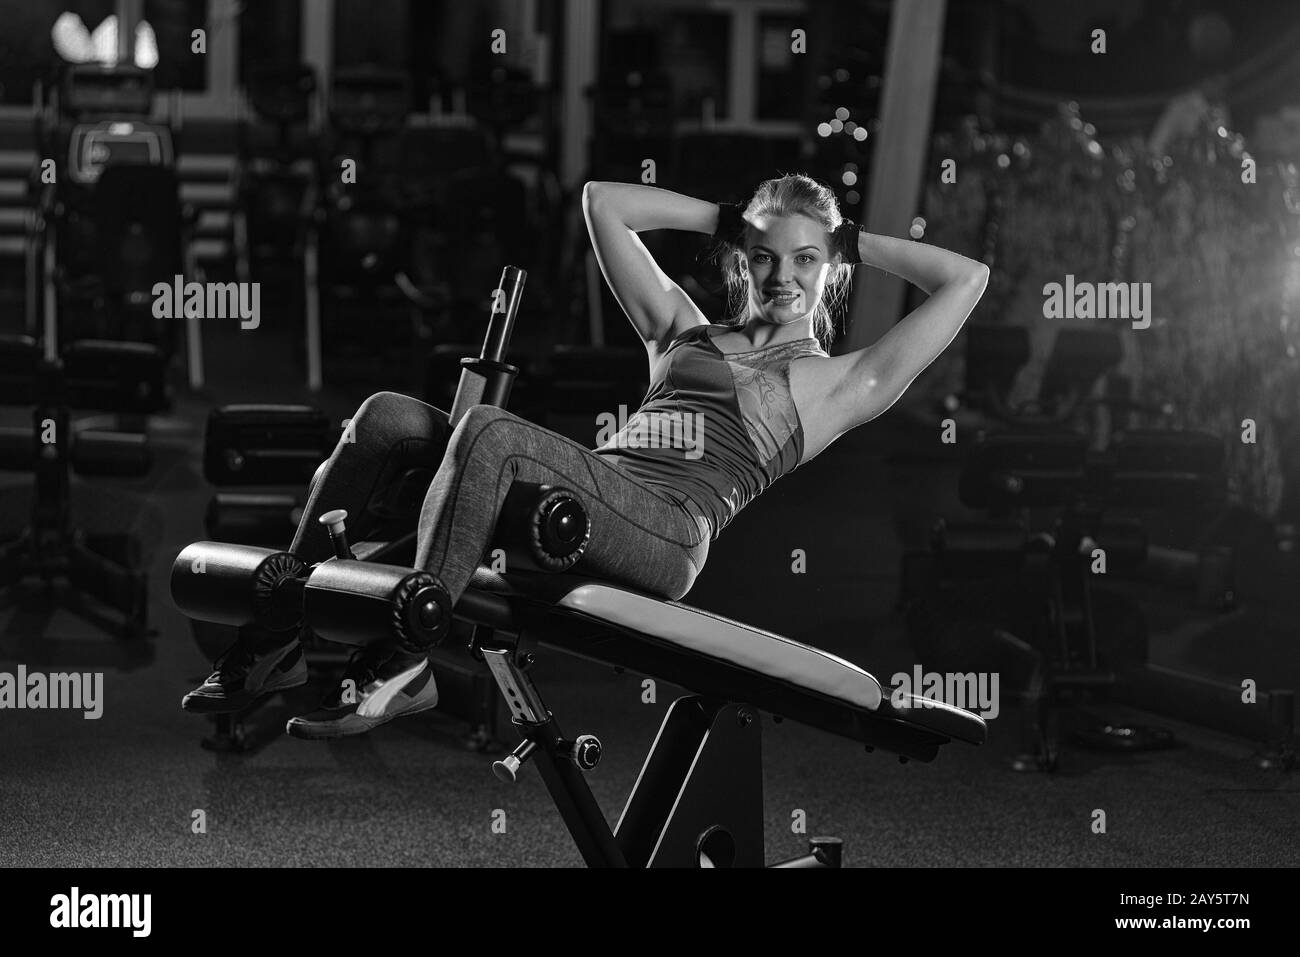 Girl shows her muscles strength Black and White Stock Photos & Images -  Alamy